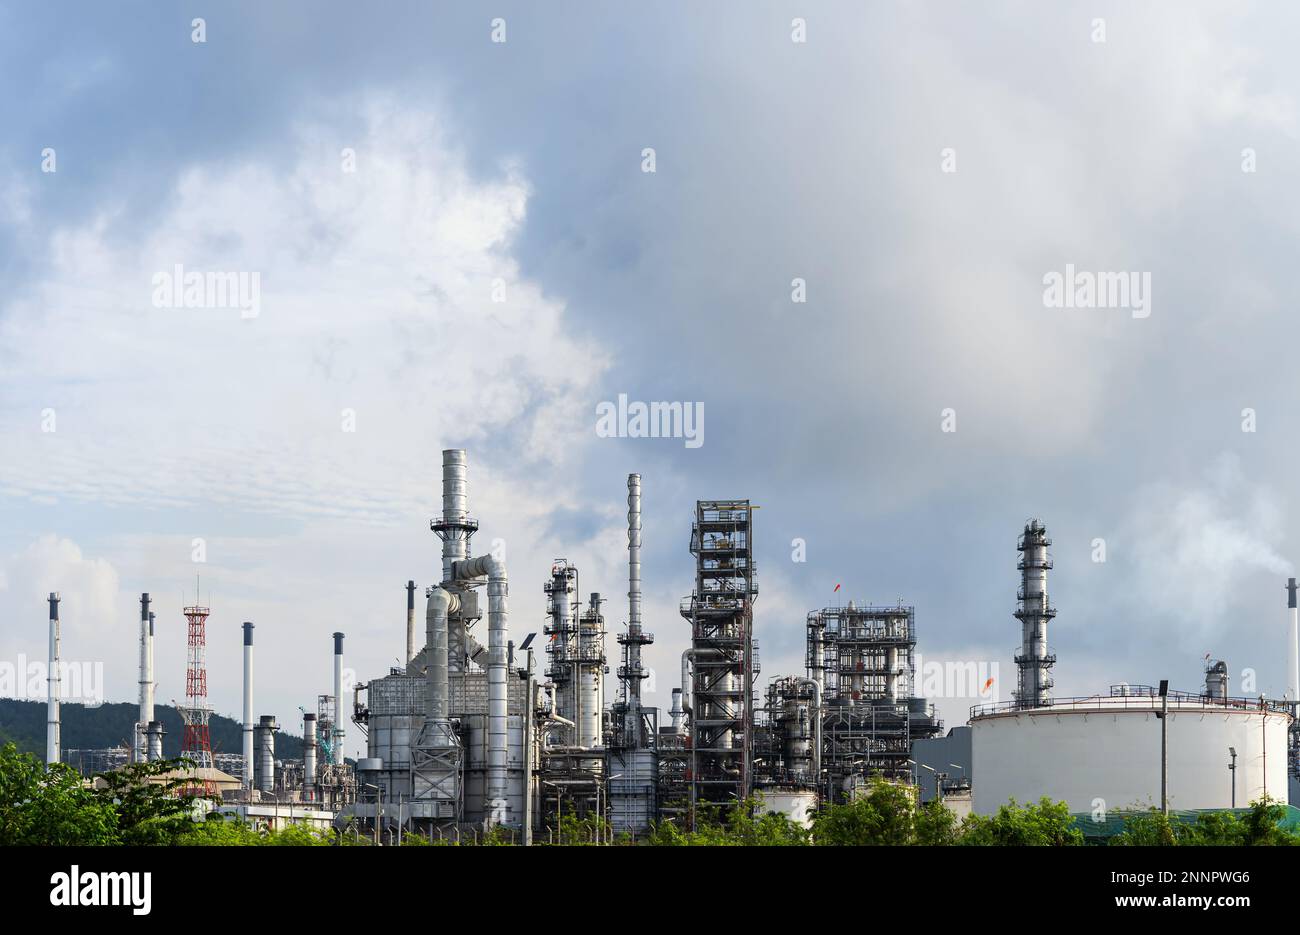 Oil and gas refinery plant and storage tank form industry zone with Air pollution smoke, Oil and gas Industrial petrochemical fuel power and energy. R Stock Photo